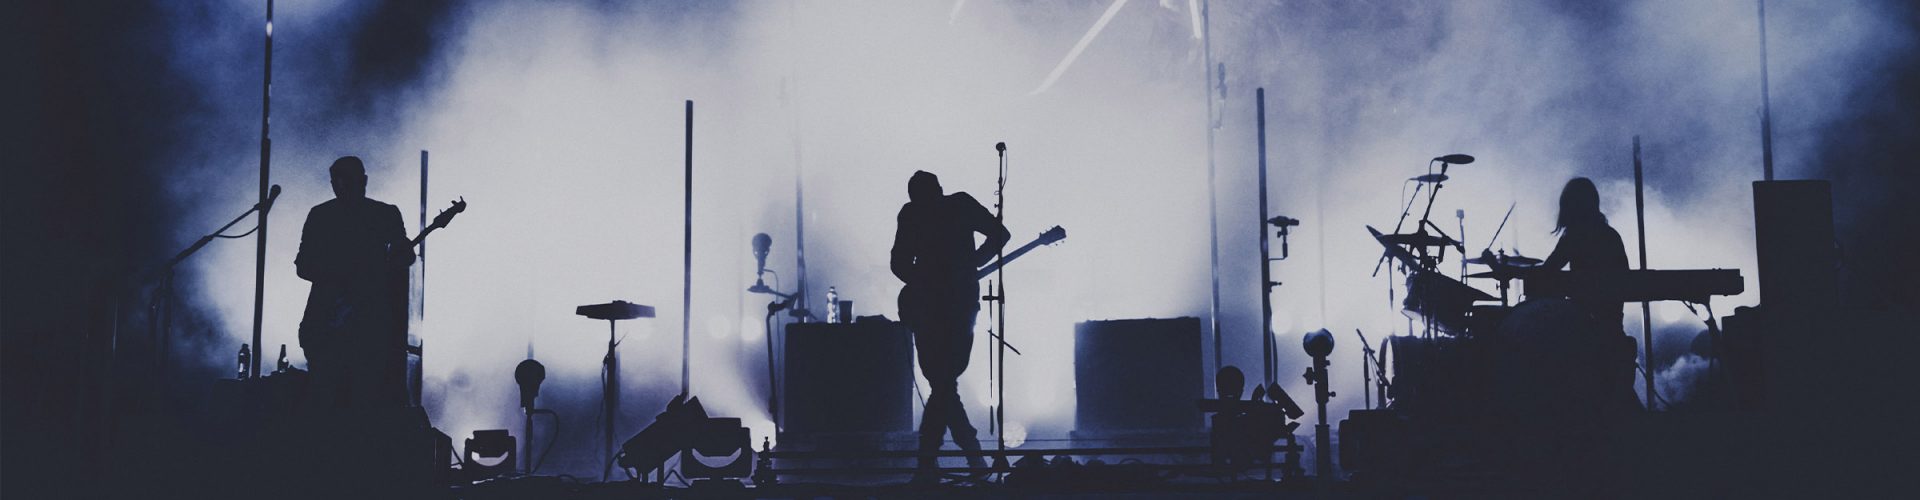 Silhouettes of a rock band performing on a smokey stage